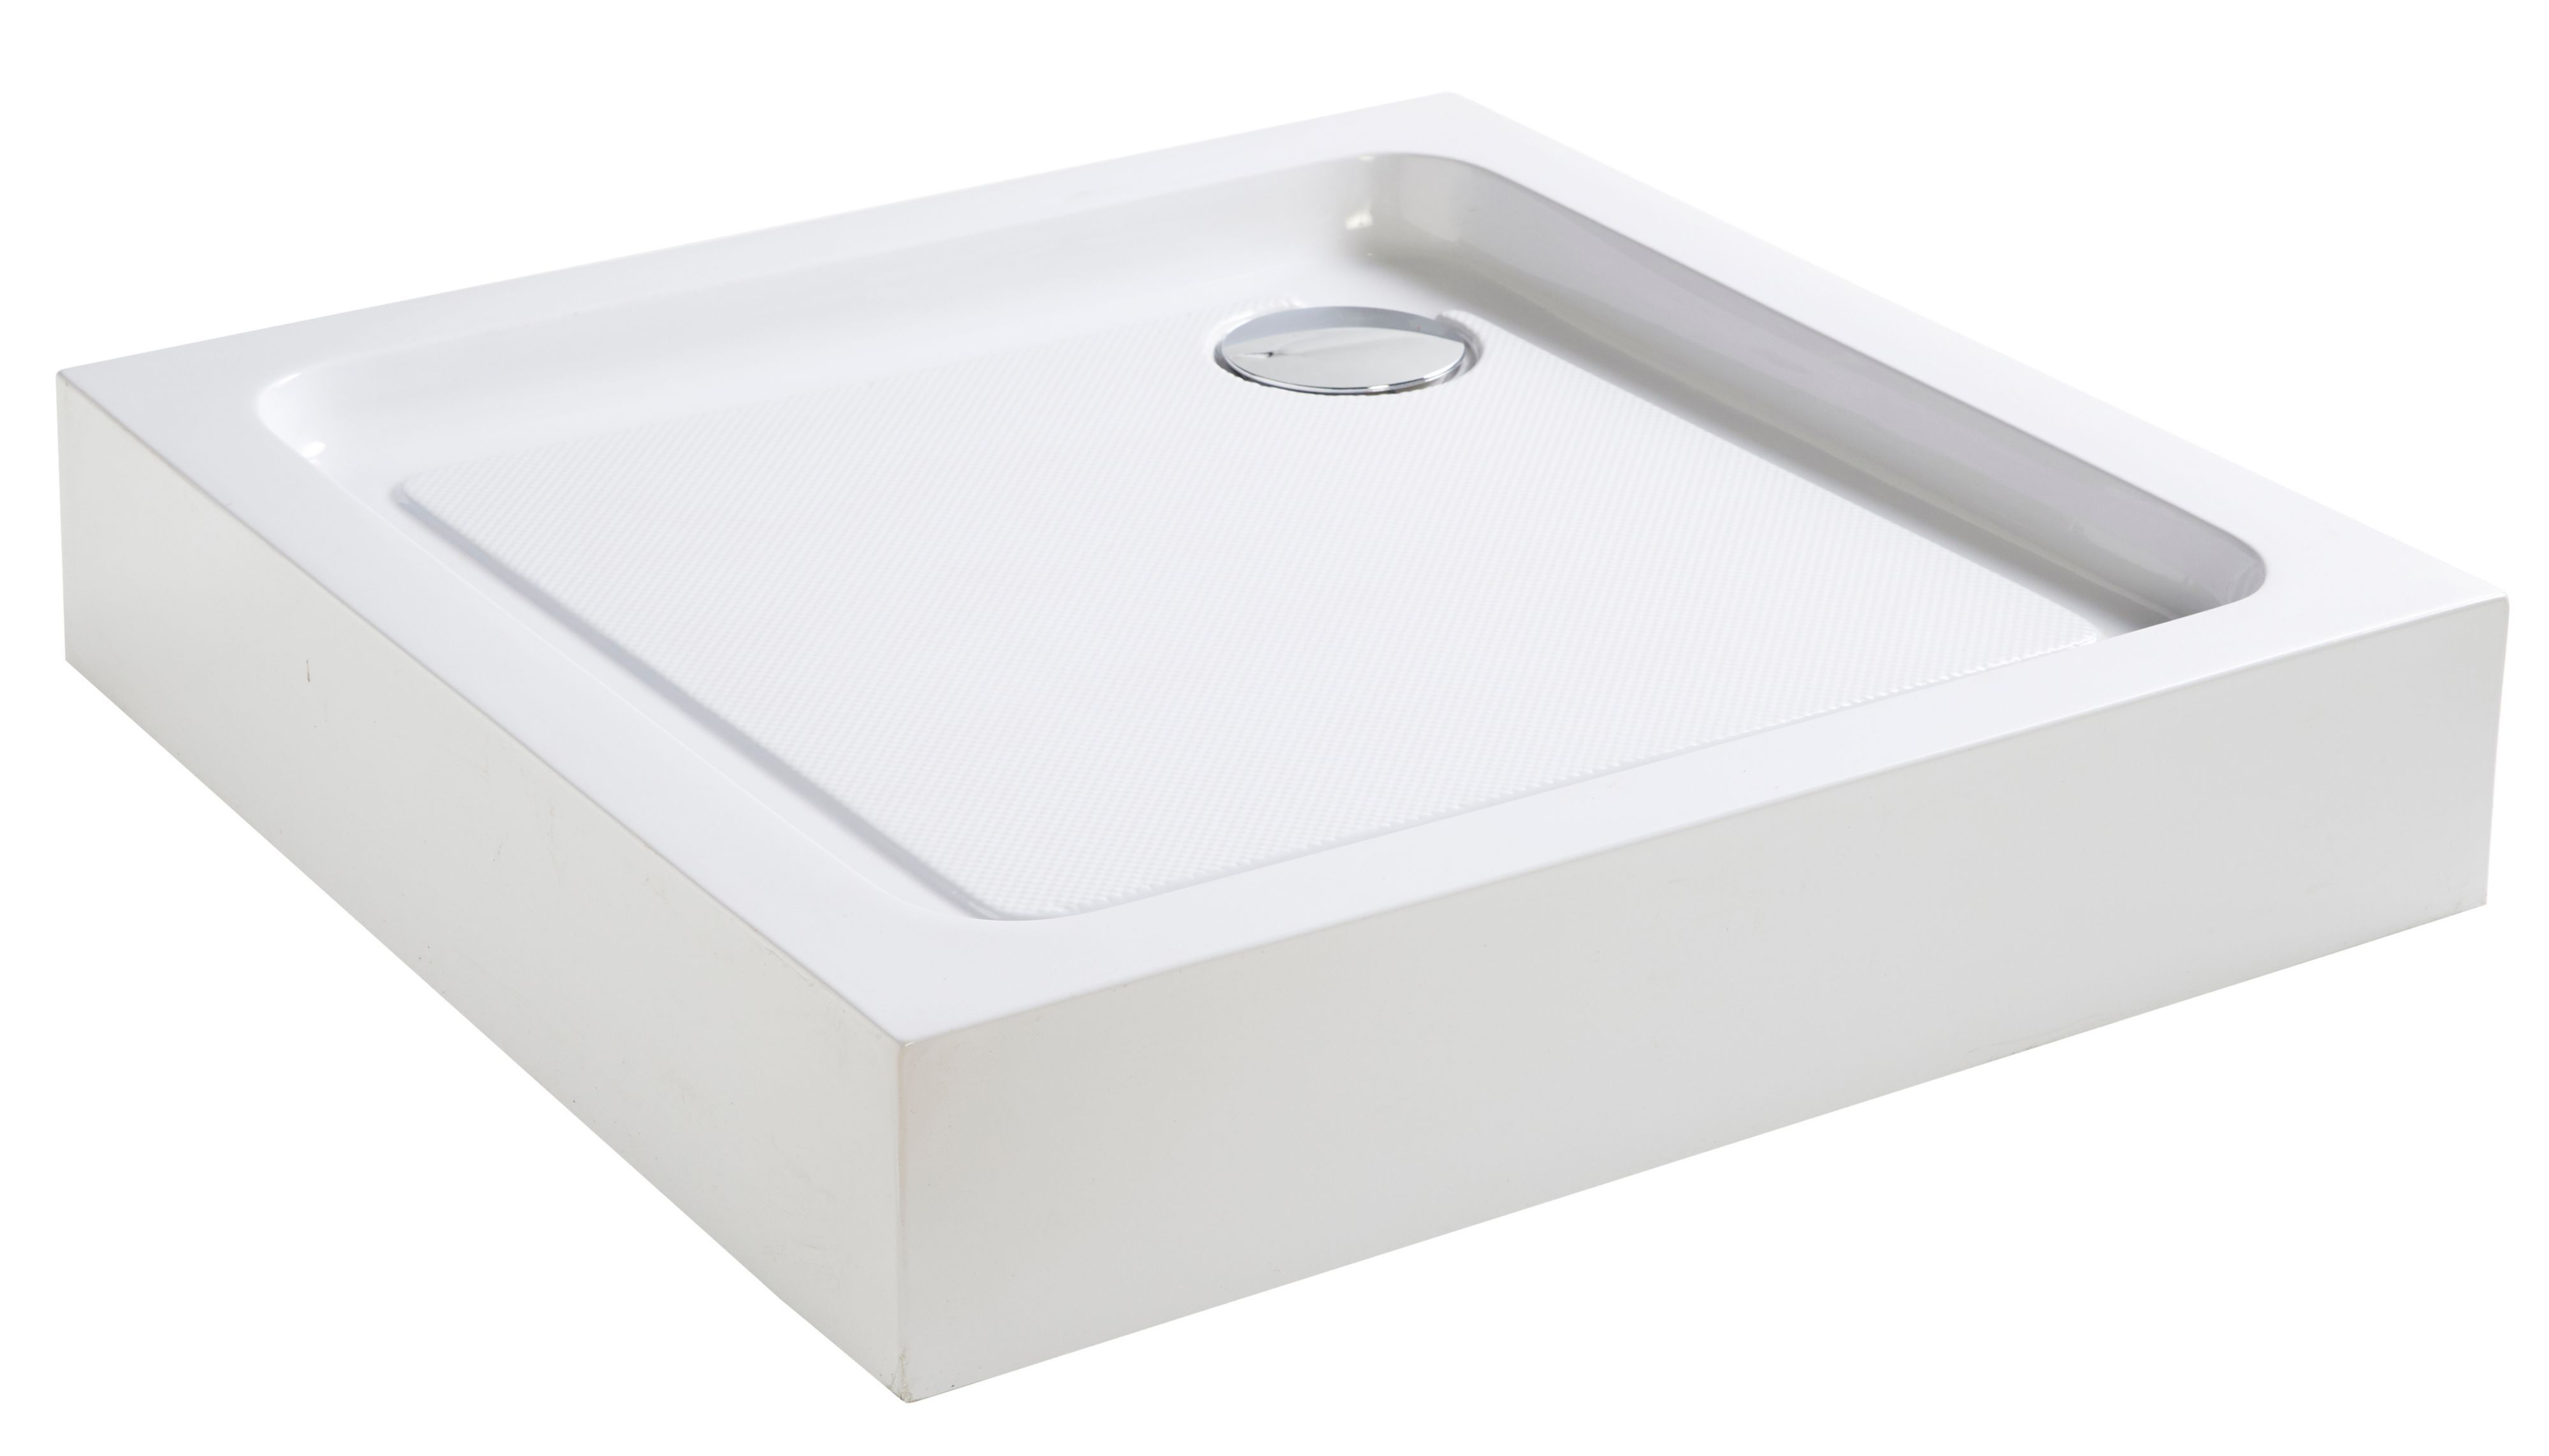 Cooke & Lewis Lagan Gloss White Square Shower tray (L)900mm (W)900mm